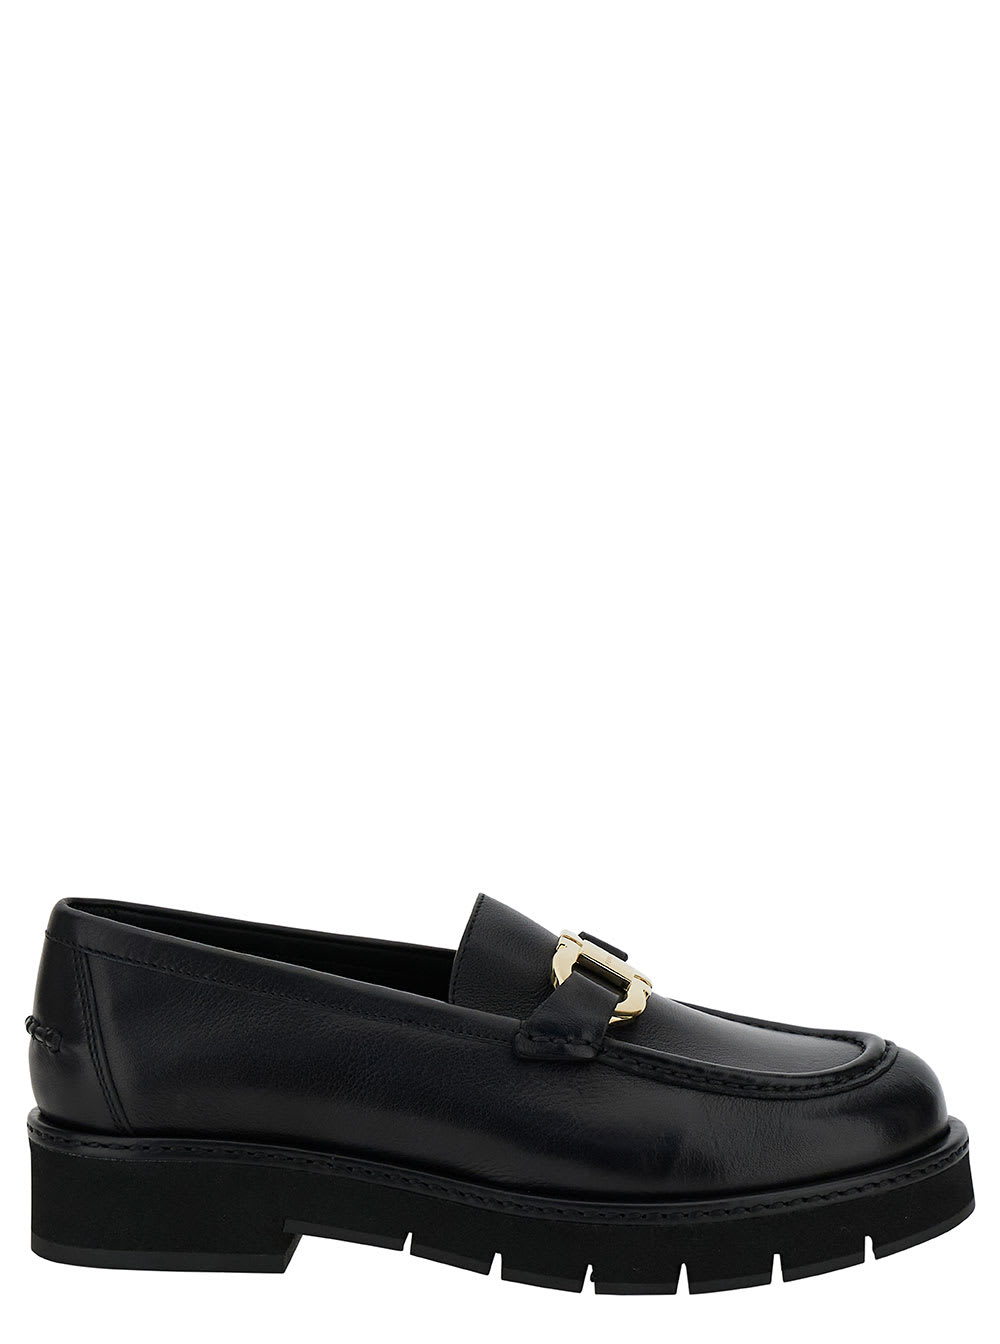 mayna Black Loafers With Gancini Detail And Platform In Leather Woman